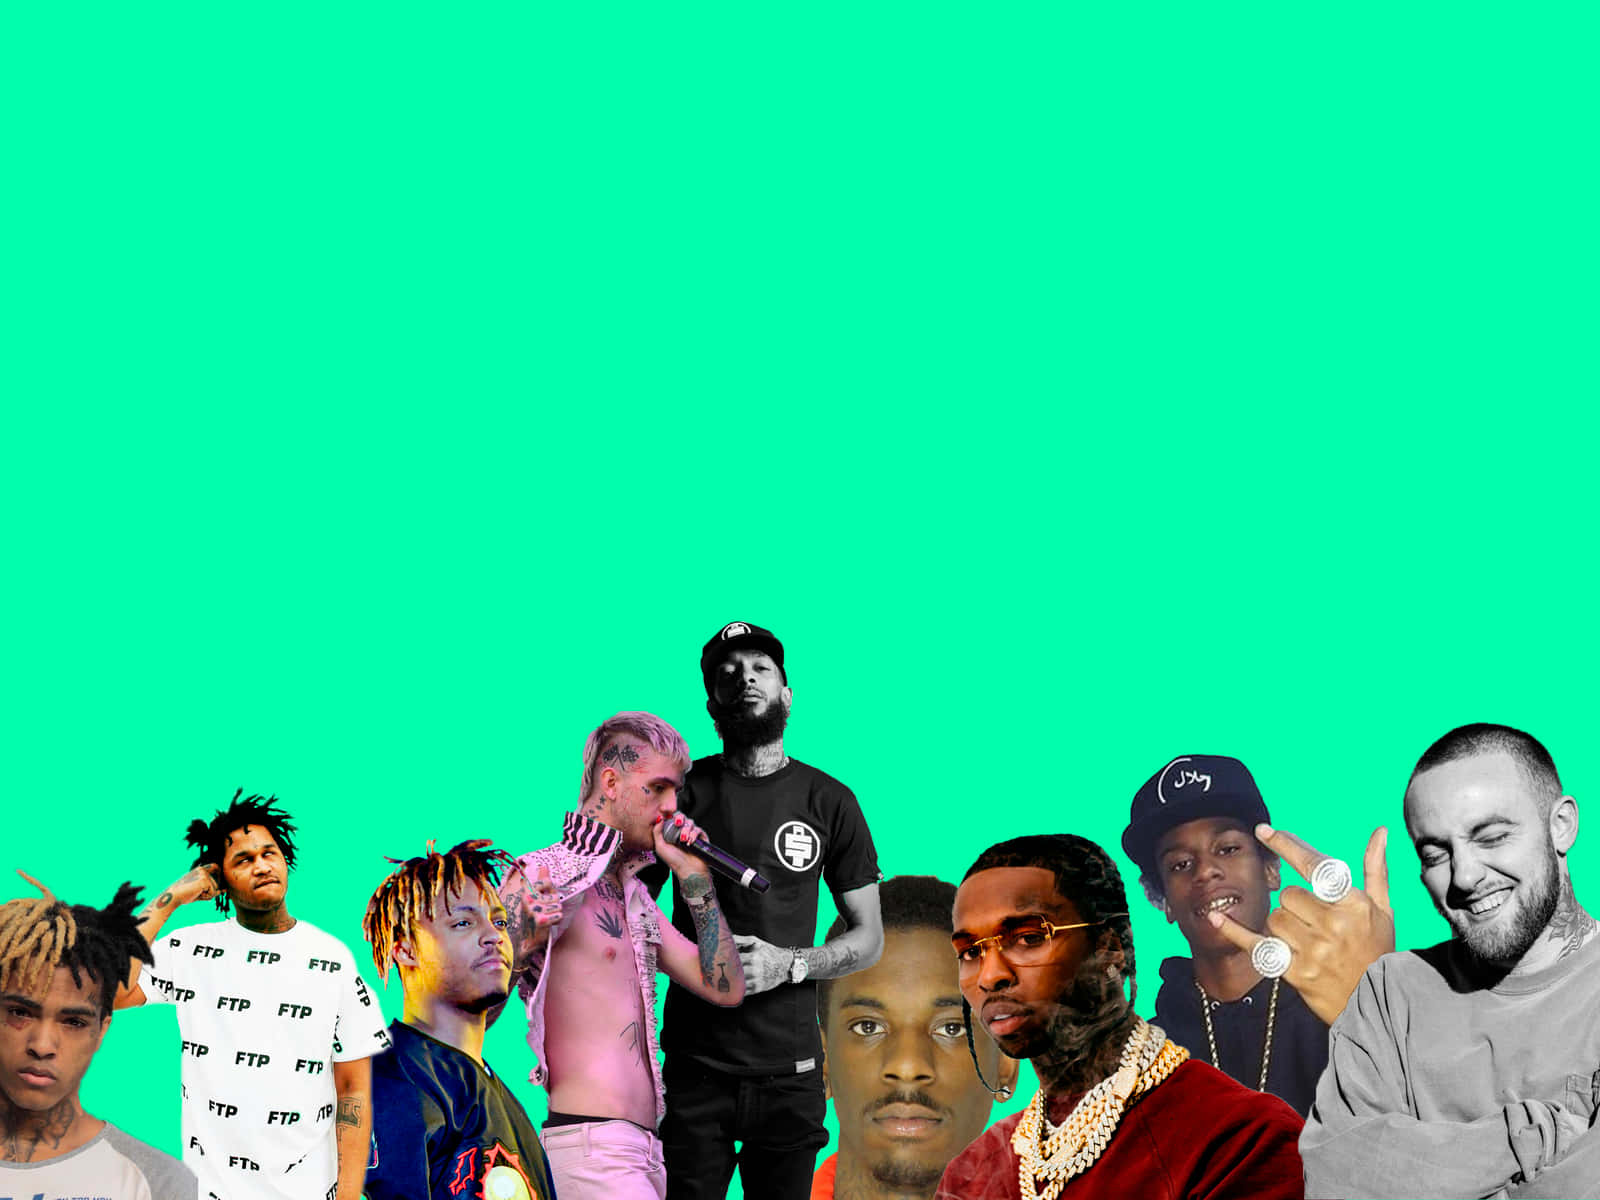 "Immortalized forever in rap history, dead rappers have a powerful presence in today's music culture." Wallpaper